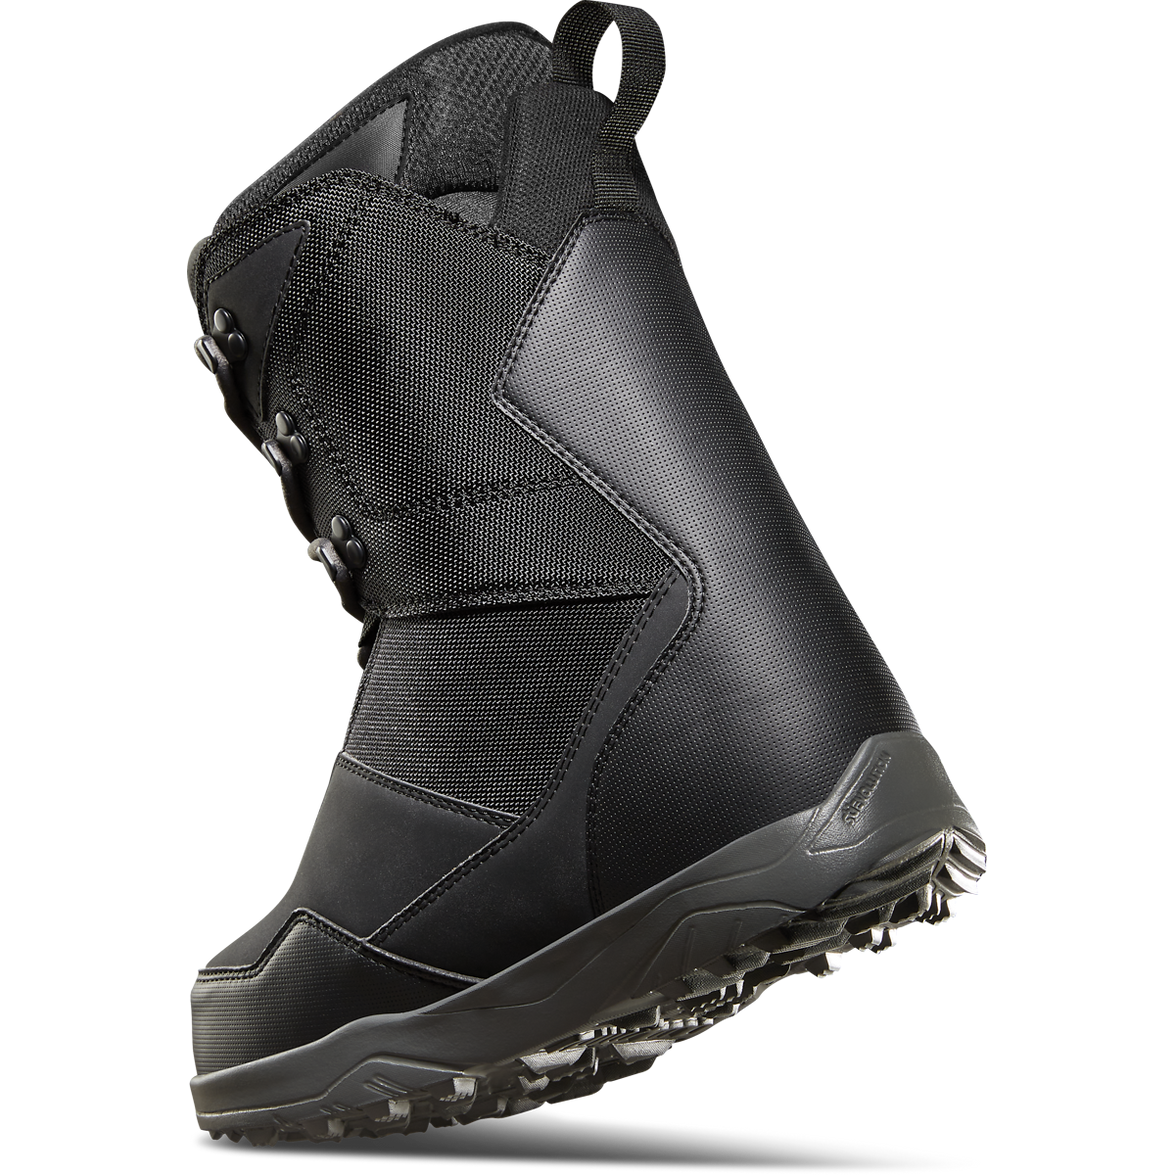 ThirtyTwo 2024 Shifty Snowboard Boot